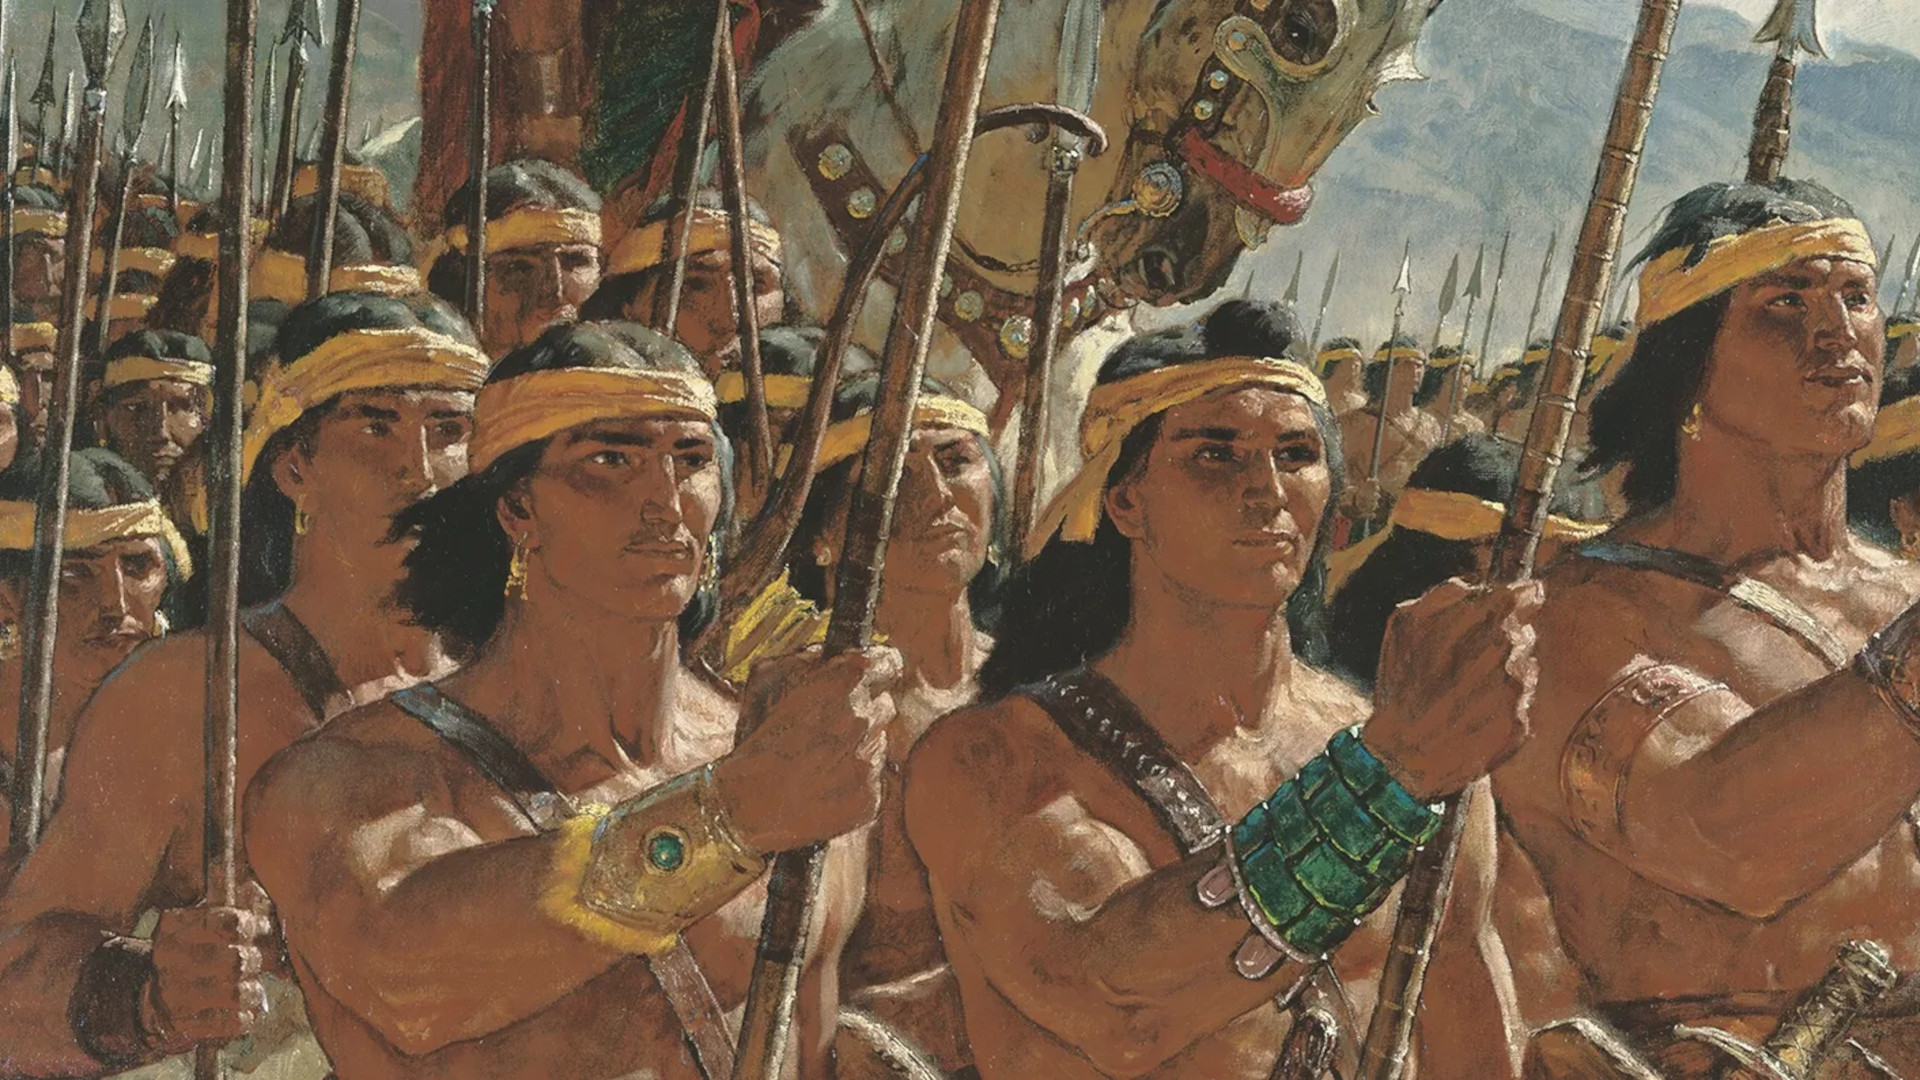 “Two Thousand Young Warriors,” by Arnold Friberg